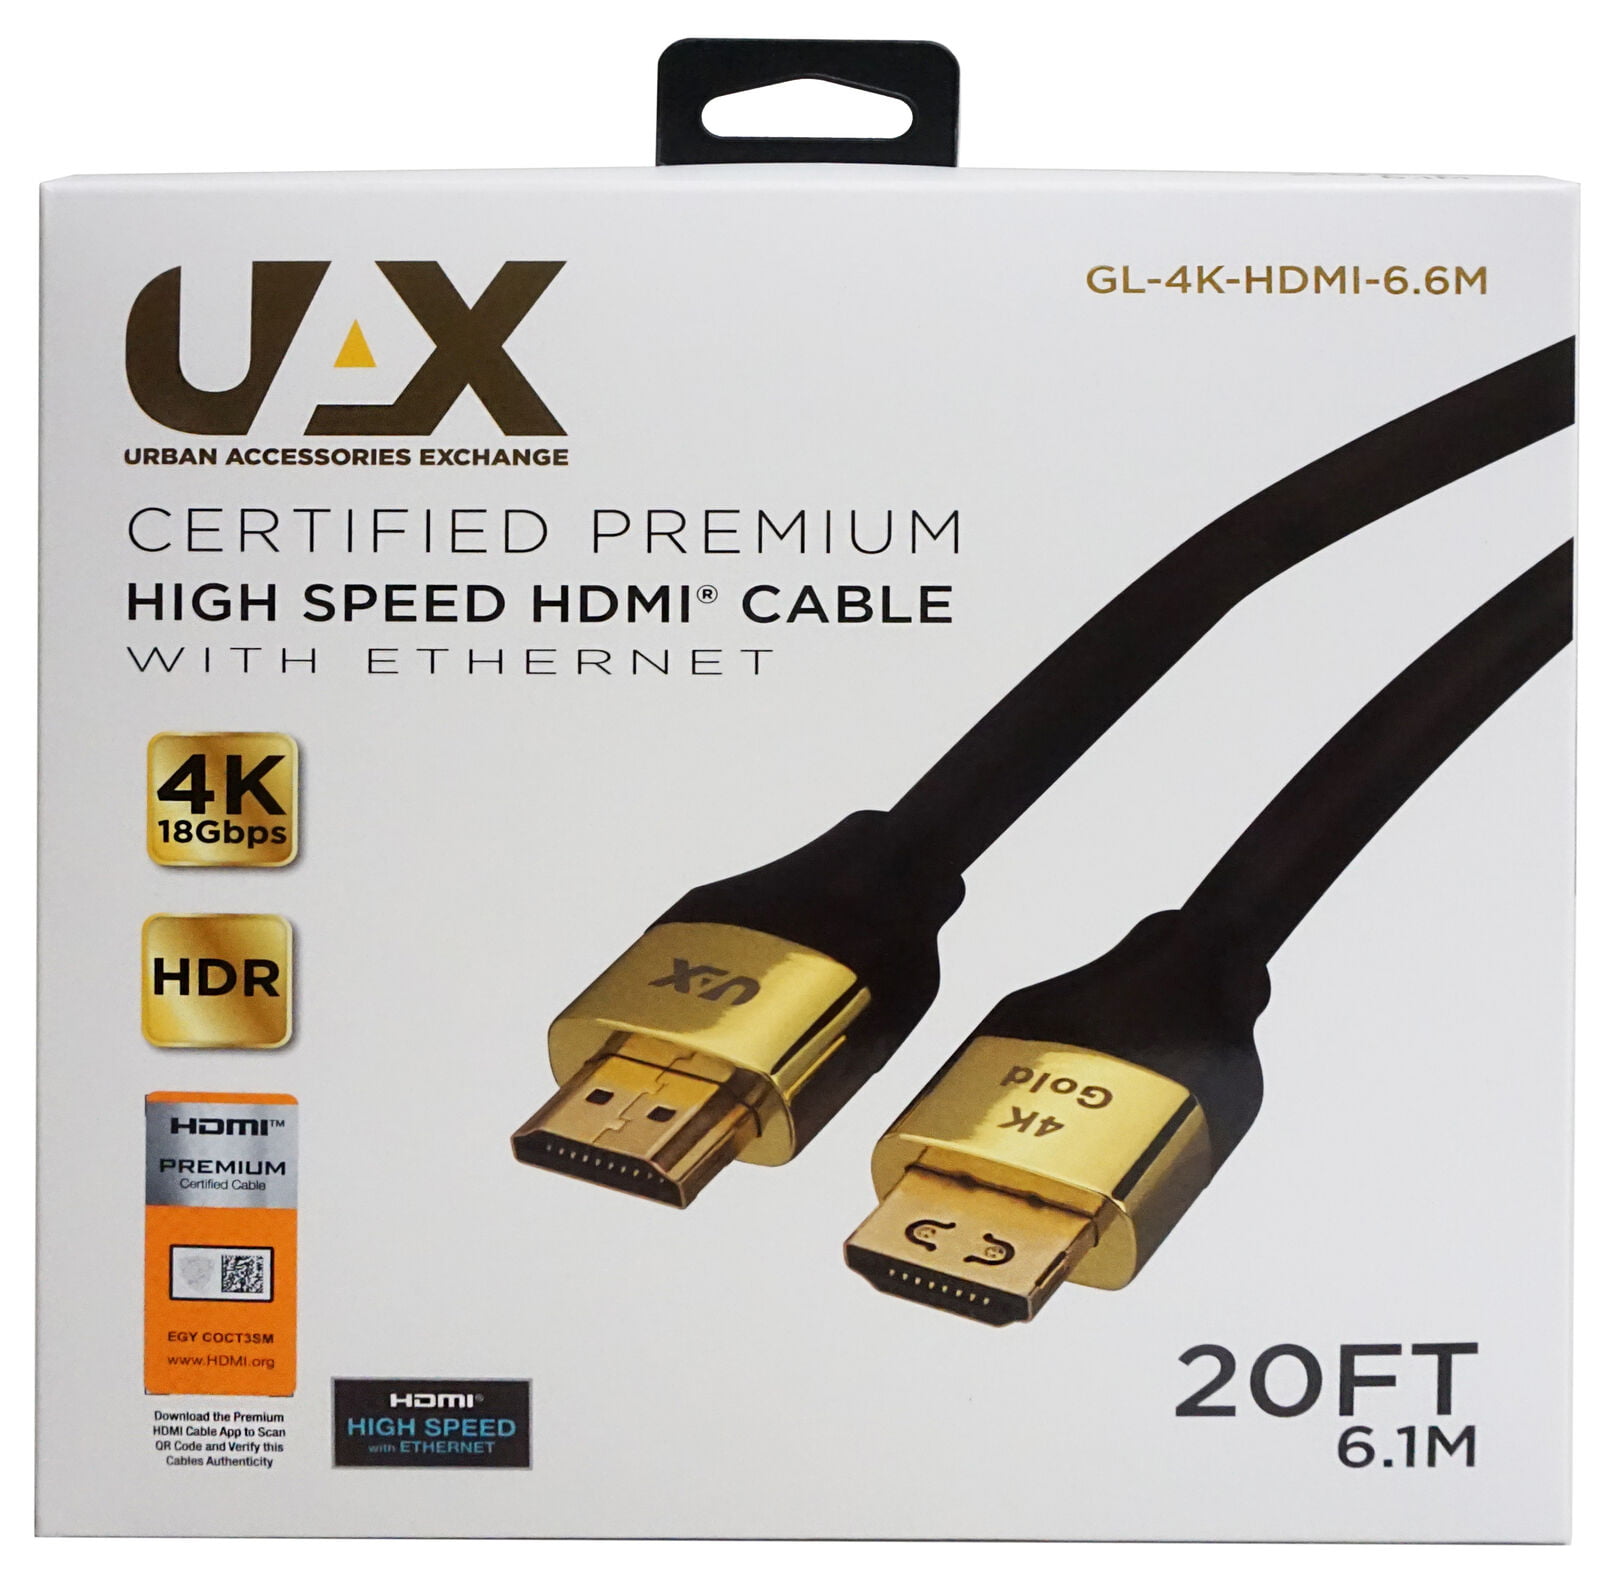 boks Anonym Ved UAX Certified Premium High Speed 4K HDR HDMI Cable with Ethernet - 20 Ft -  Walmart.com